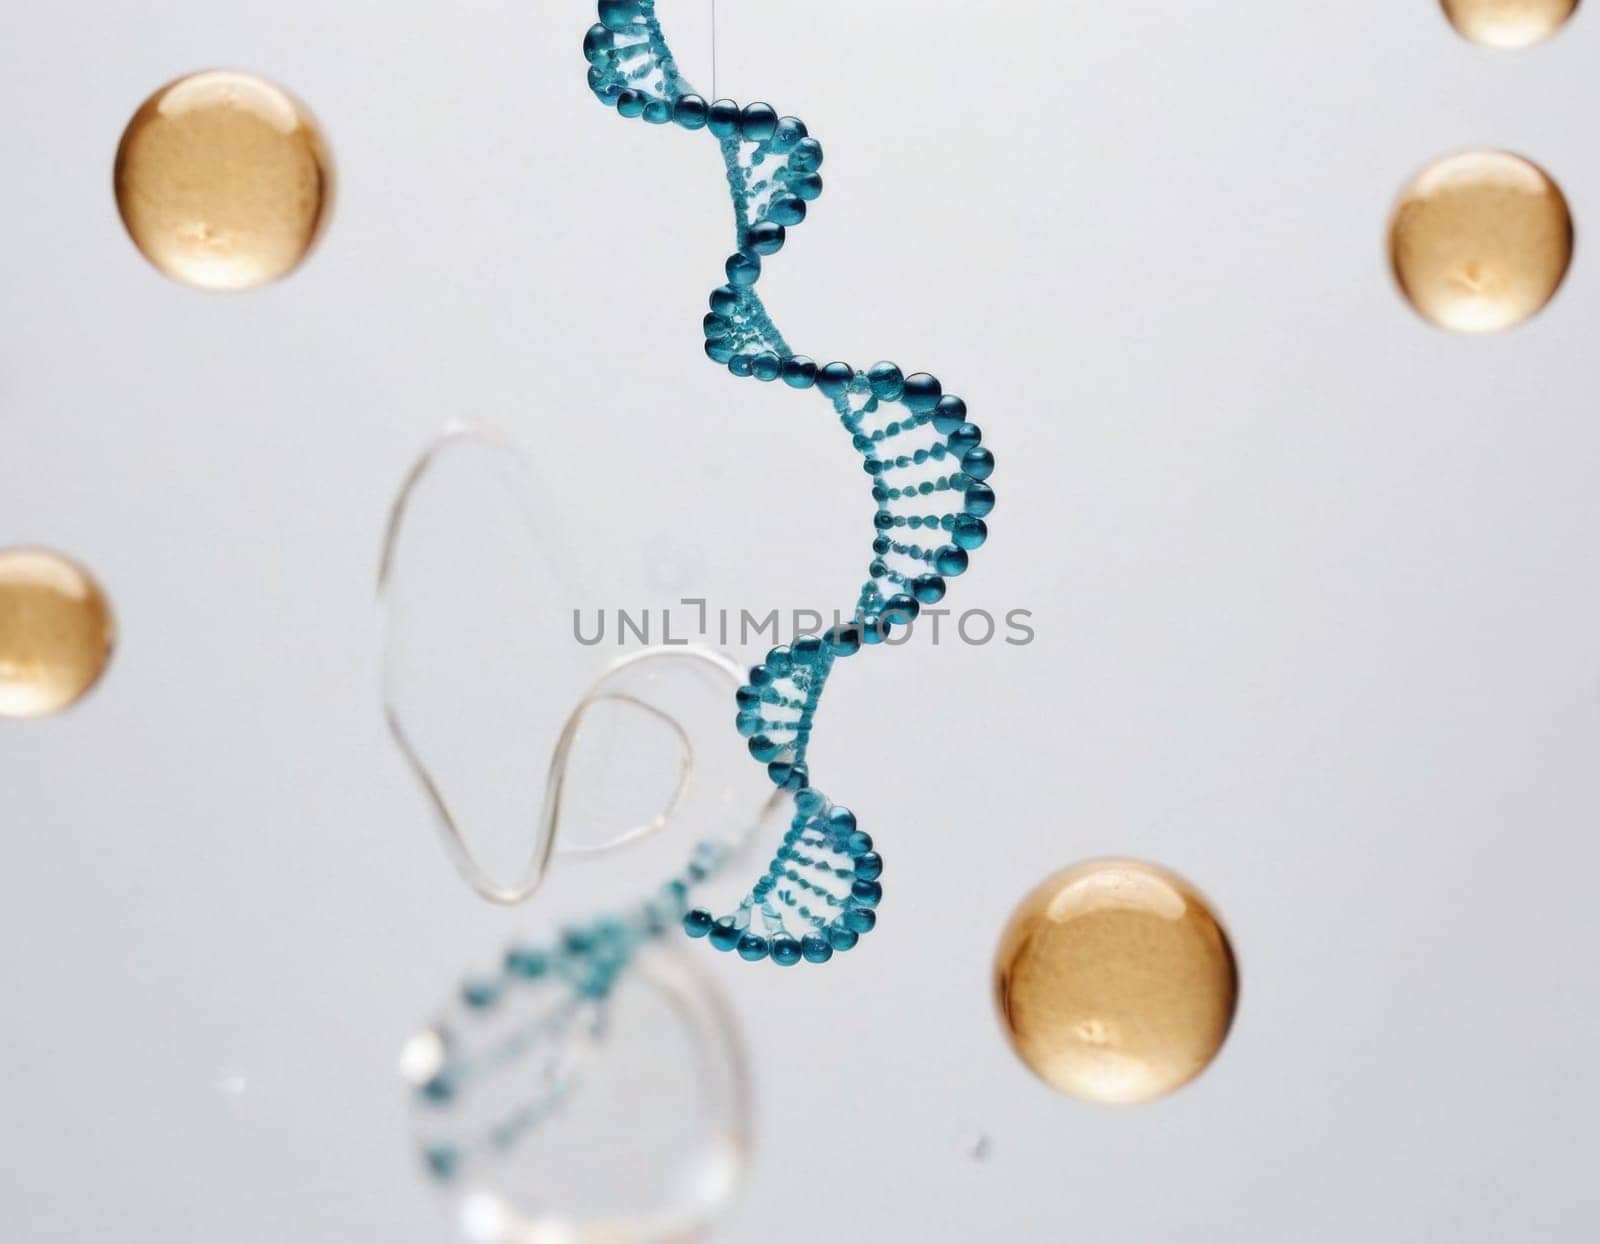 Abstract artistic depiction of DNA made from glass structures. AI generation